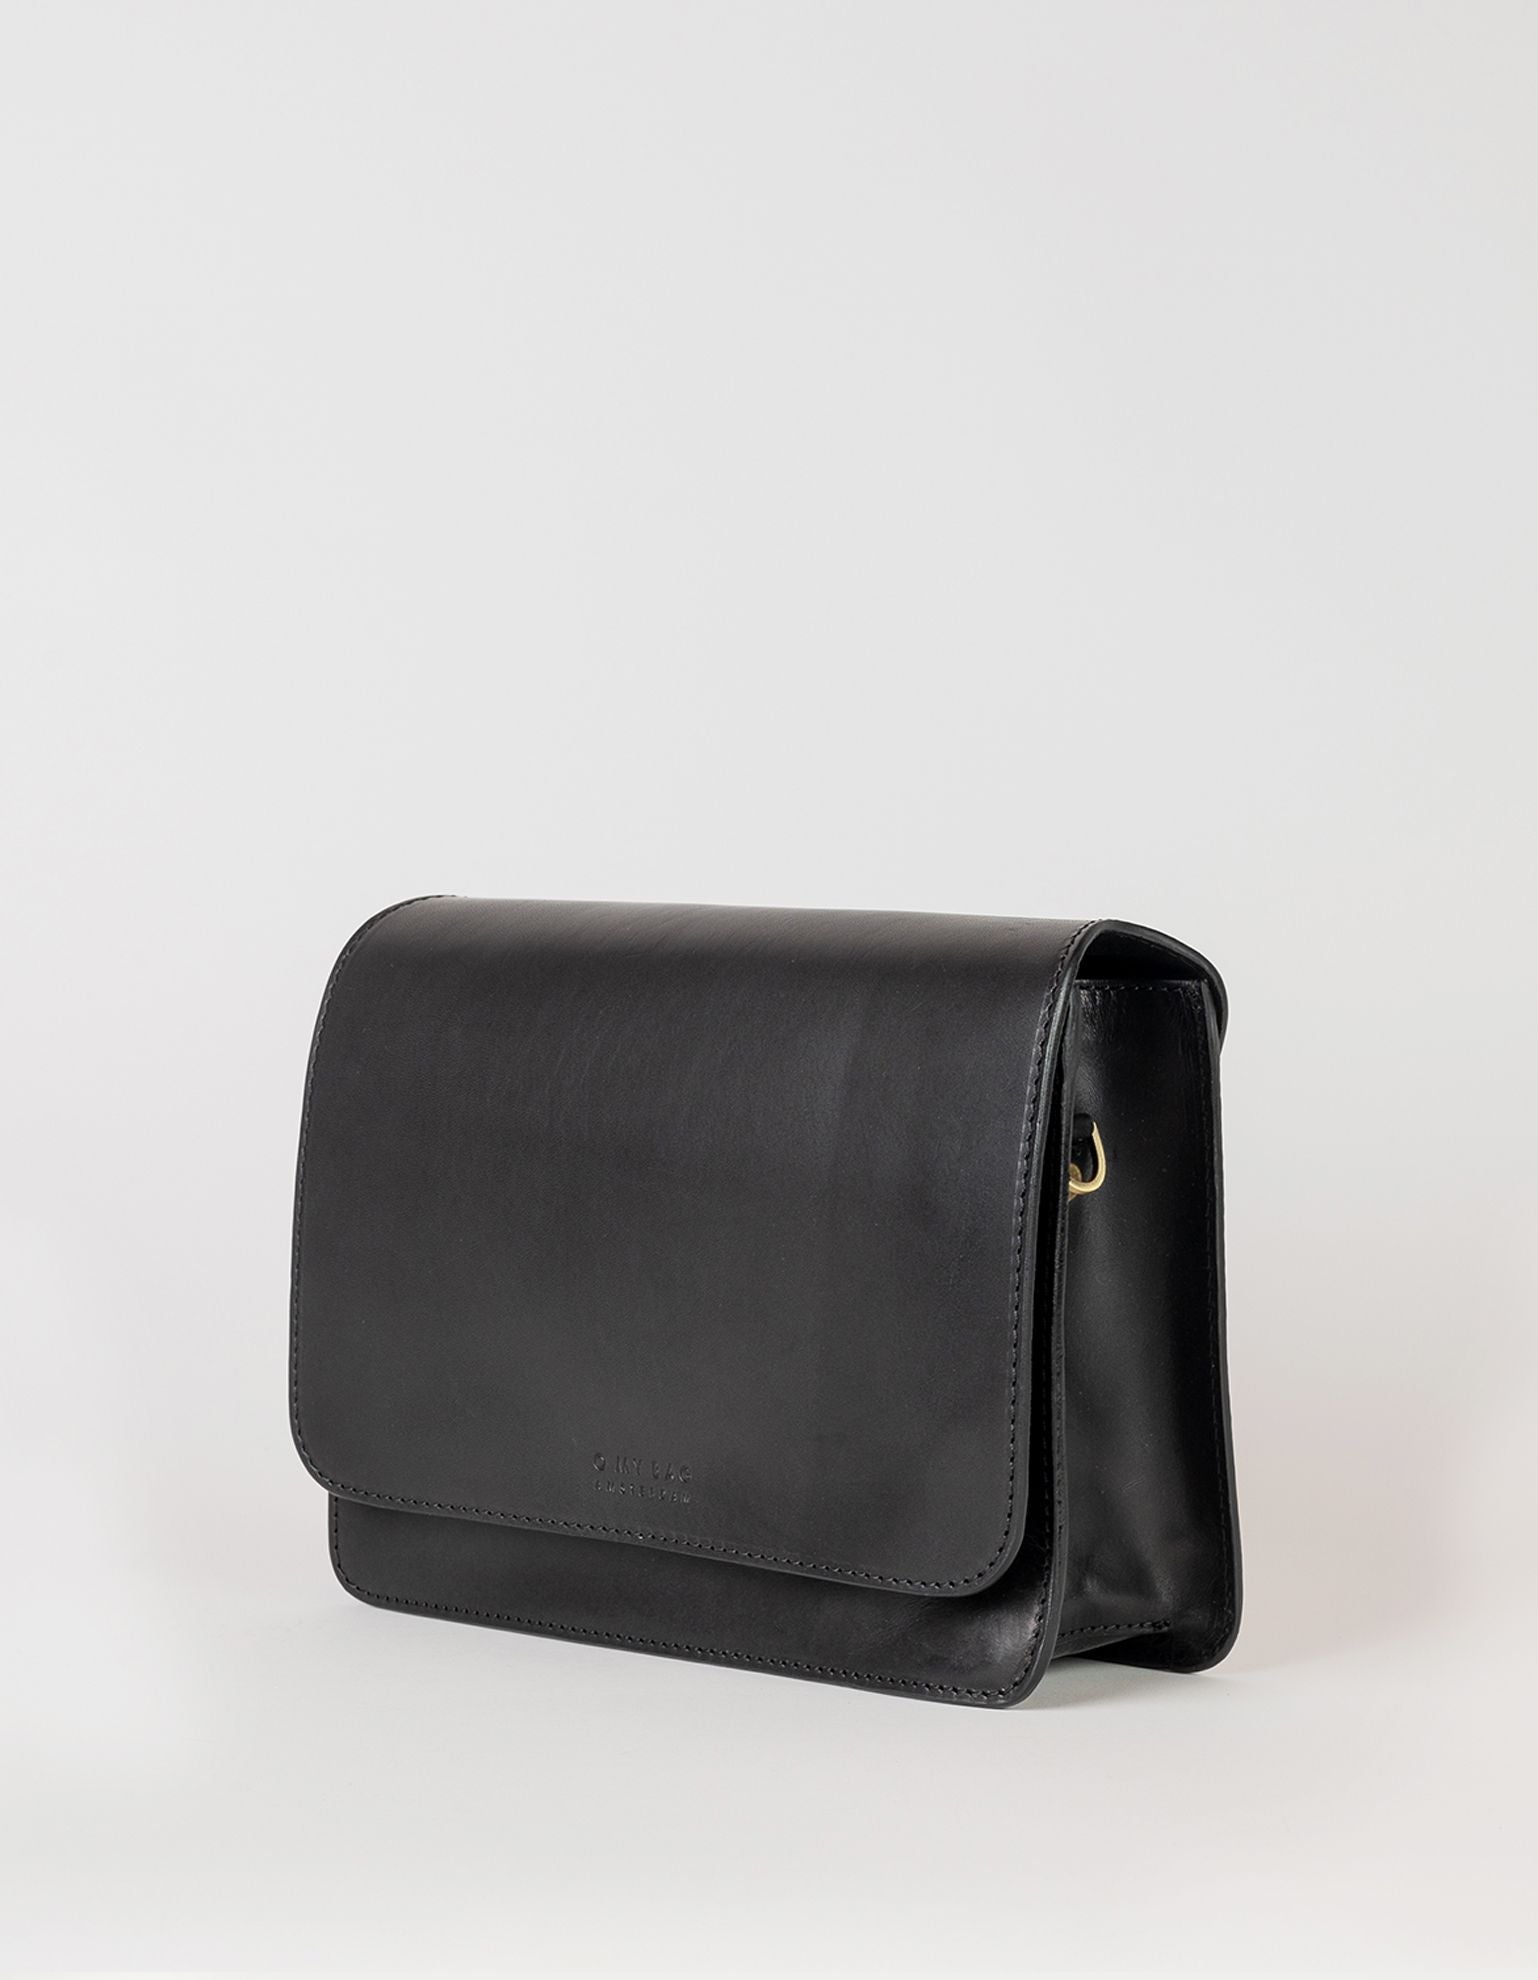 Audrey black classic leather. Side product image.